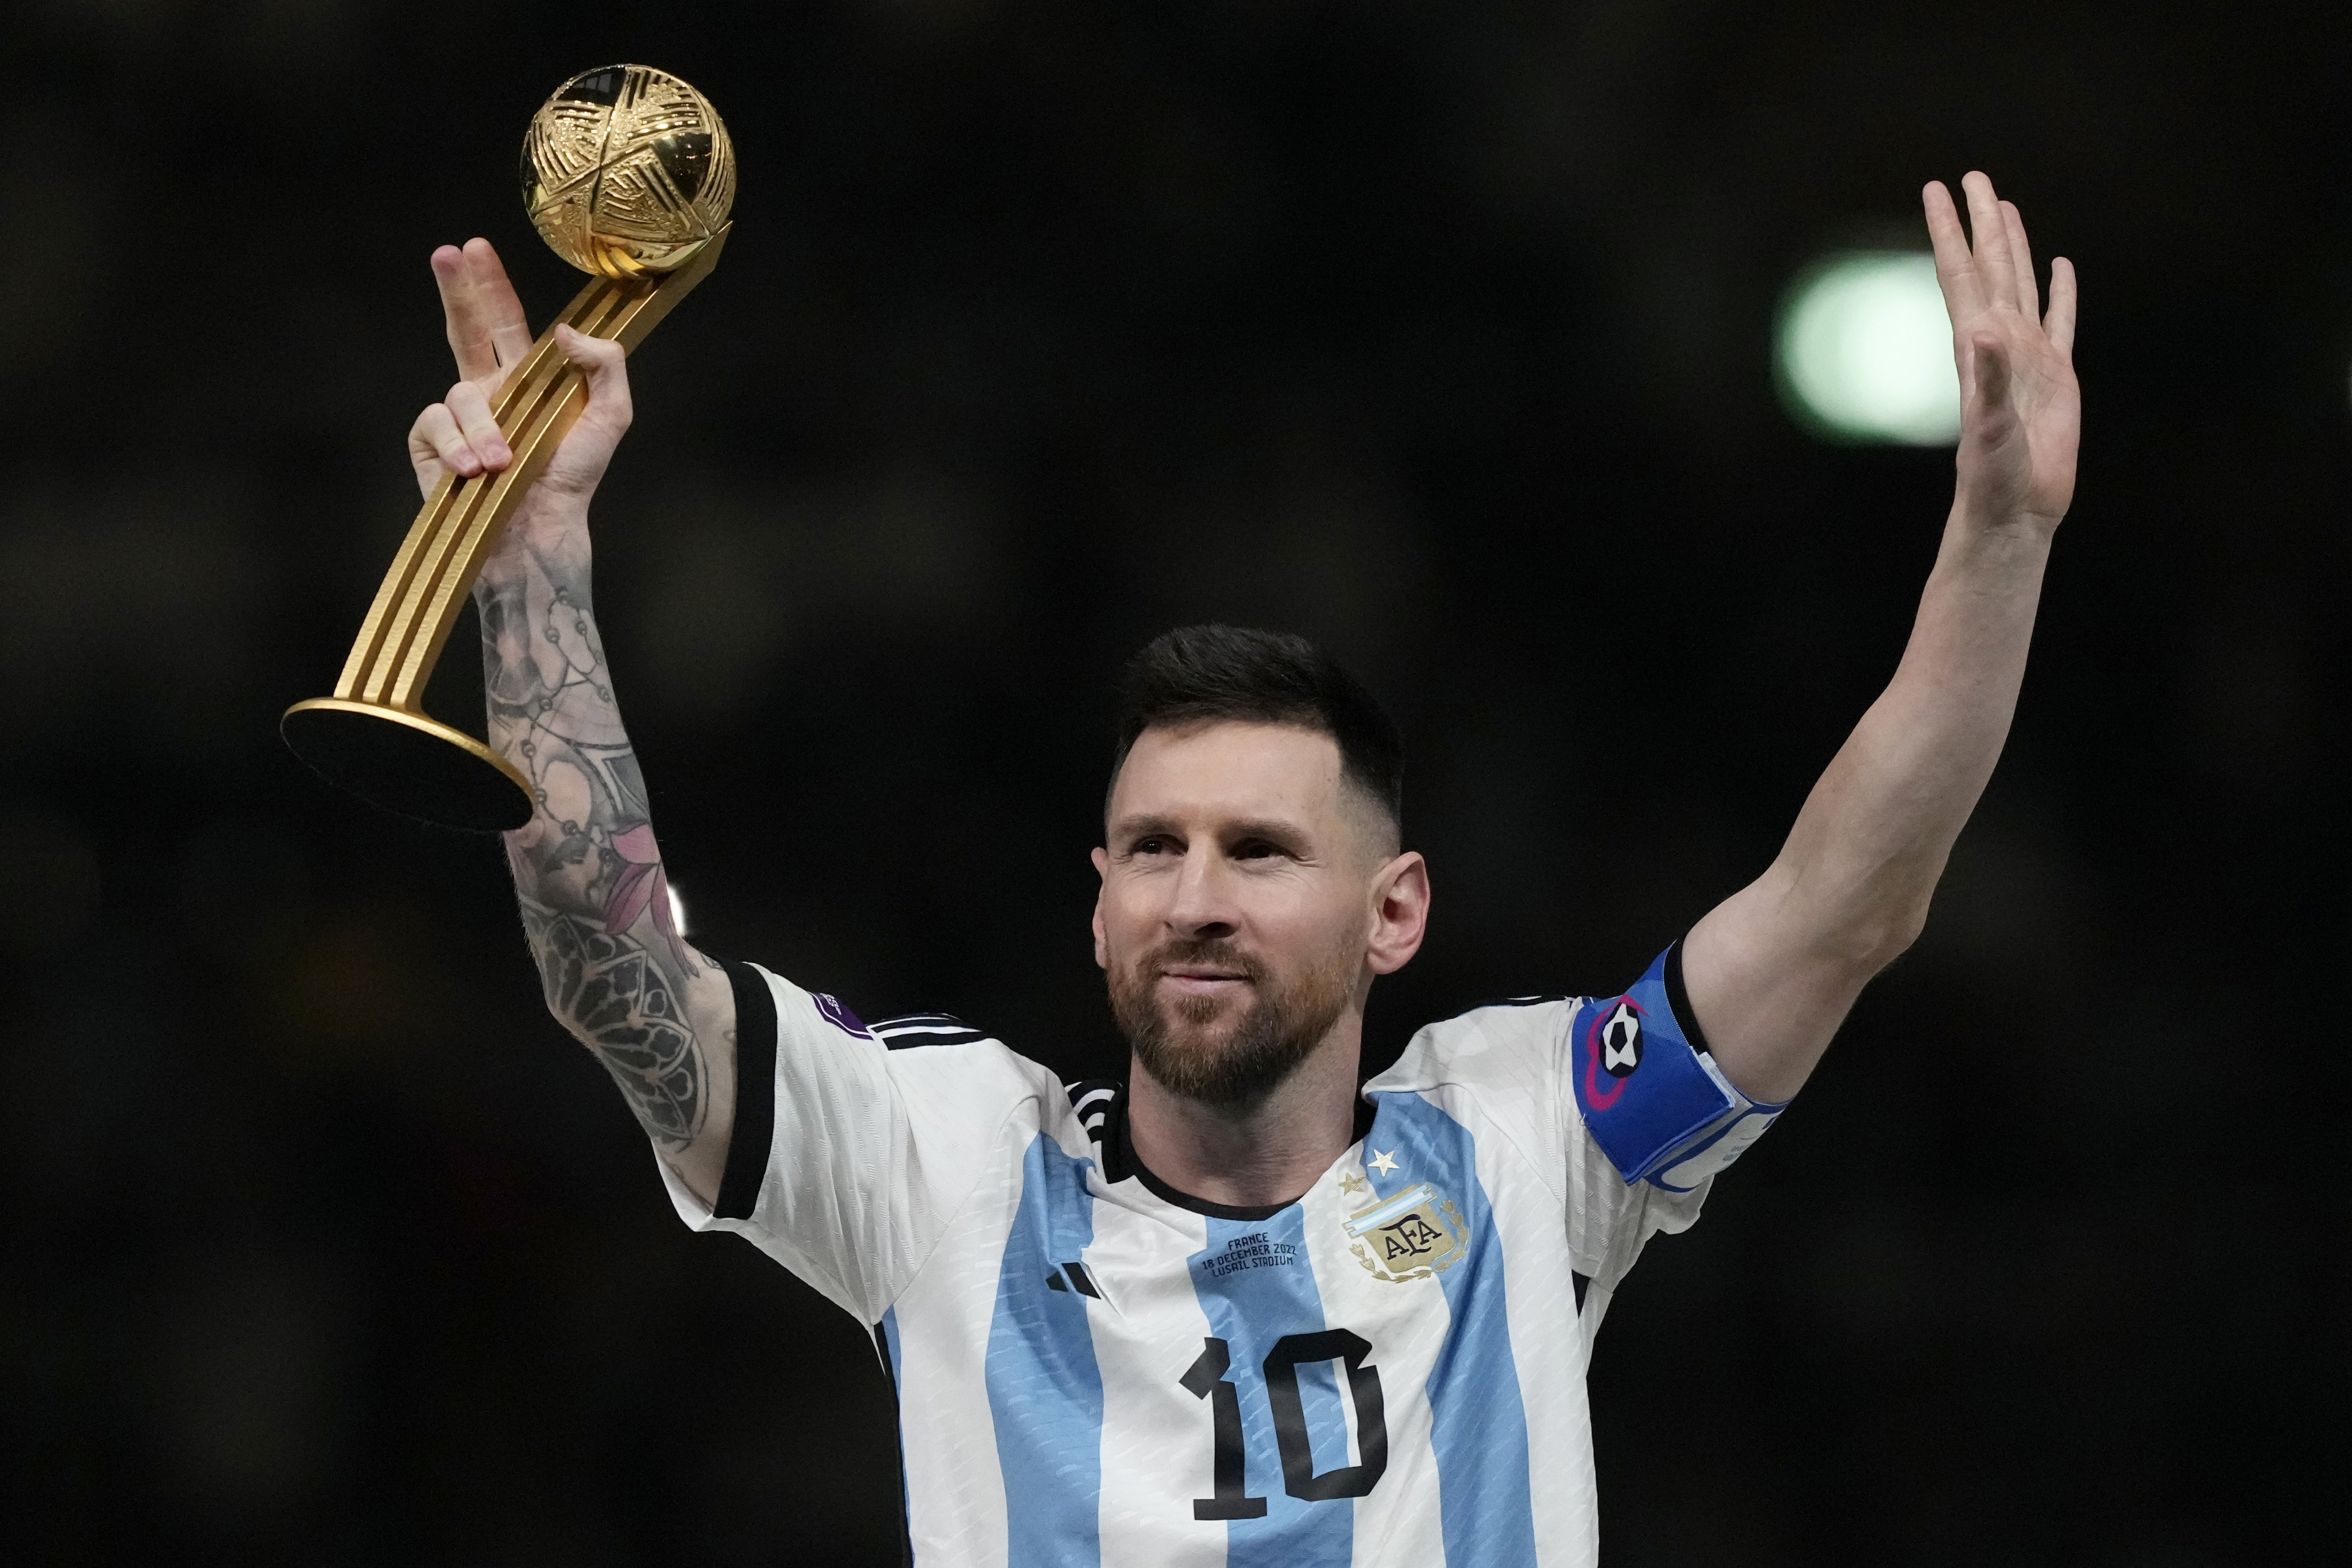 Argentina’s Lionel Messi waves after receiving the Golden Ball award for best player at the end of the World Cup finals against France in Lusail, Qatar, in December 2022. Photo: AP Photo